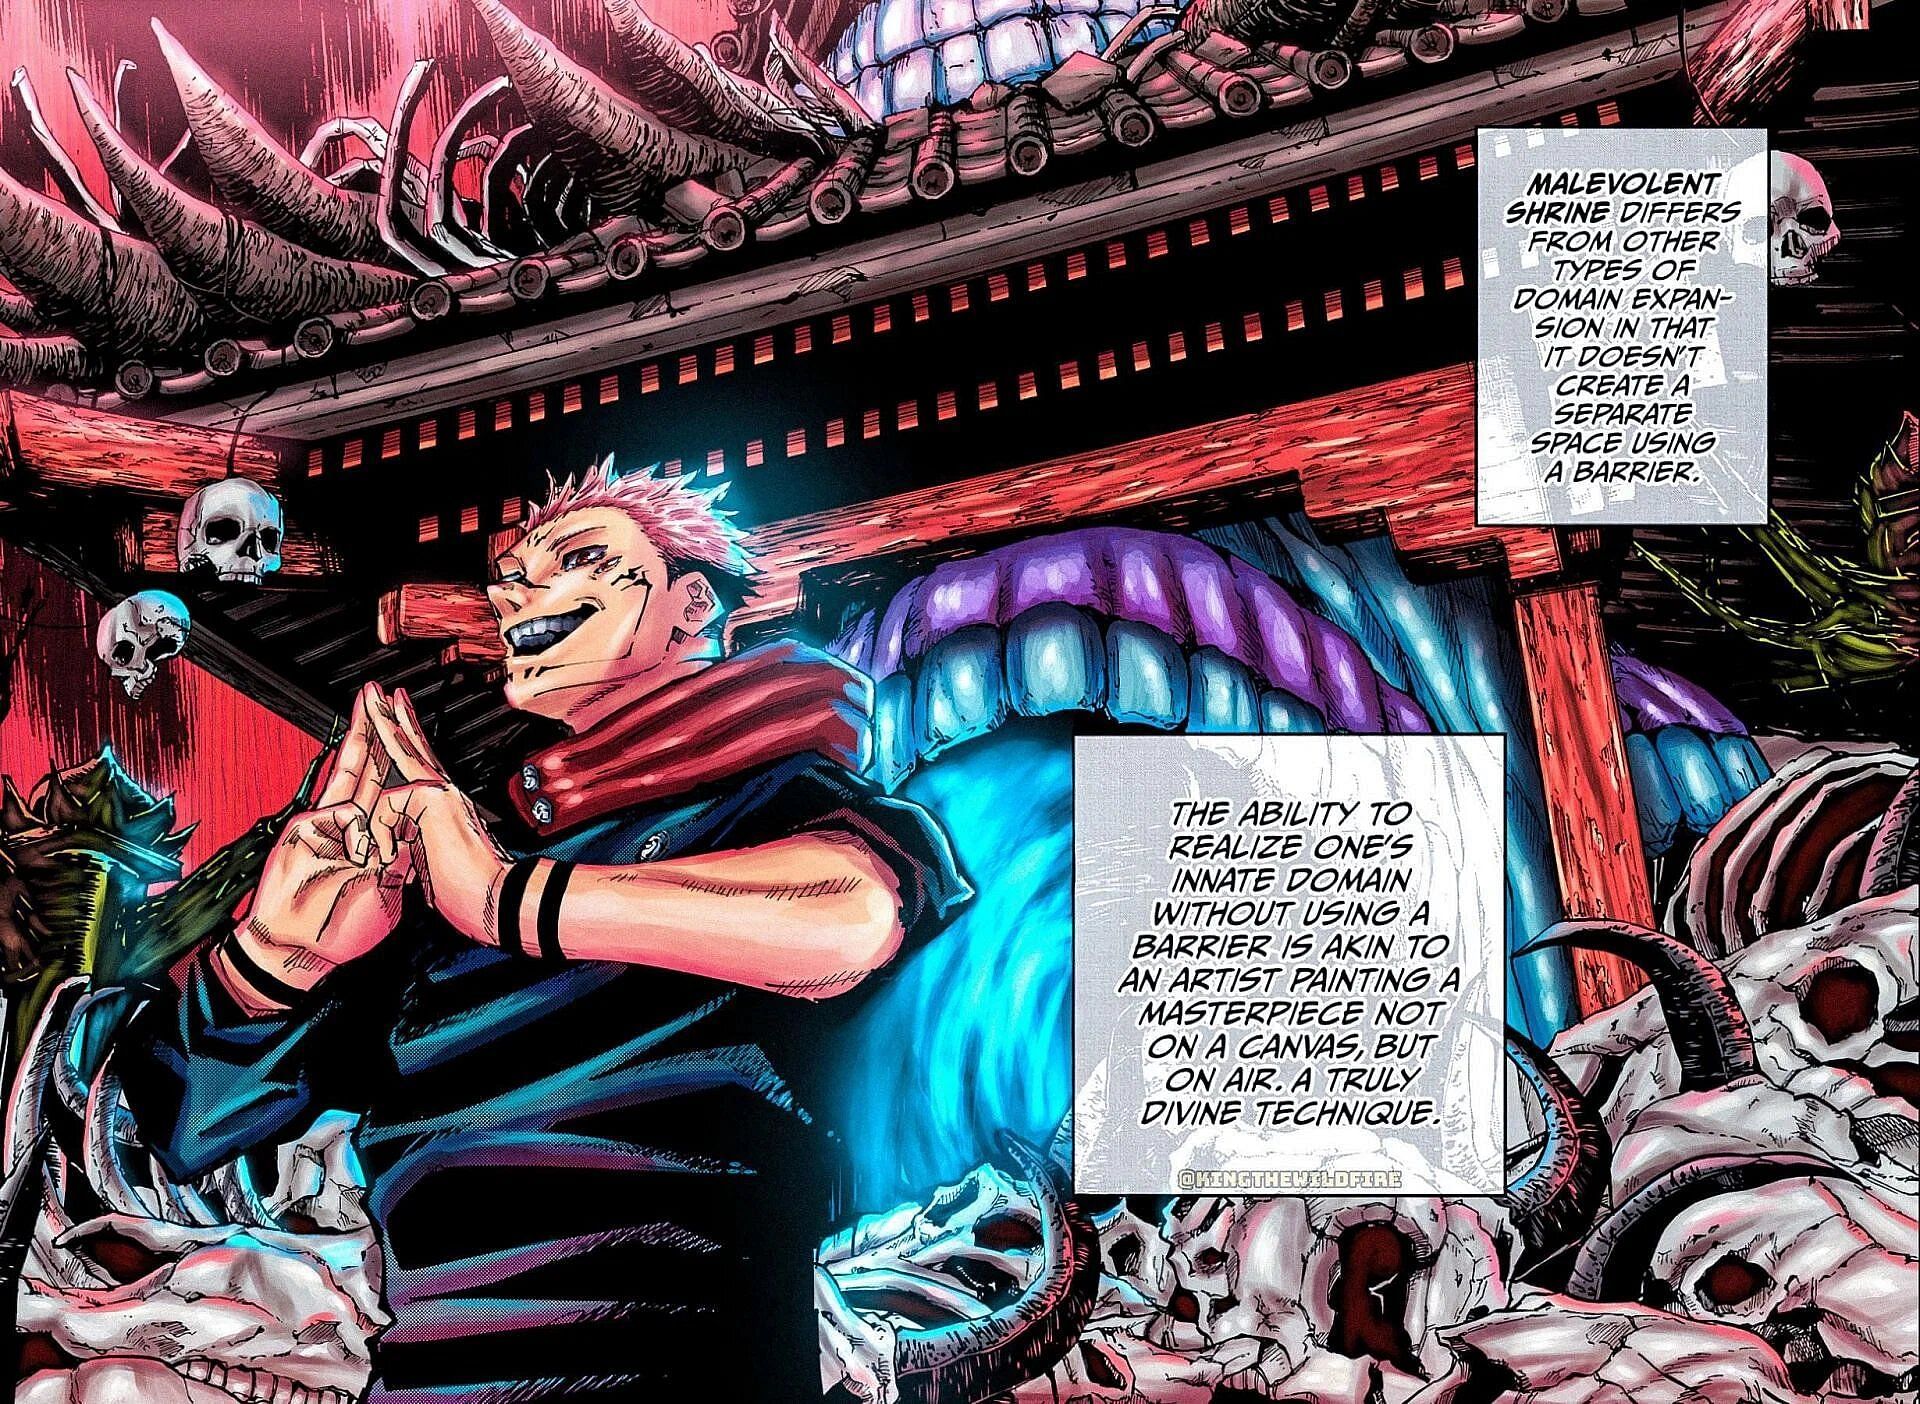 Jujutsu Kaisen has a lot of interesting concepts and Domain Expansion is one of them (Image via Shueisha).